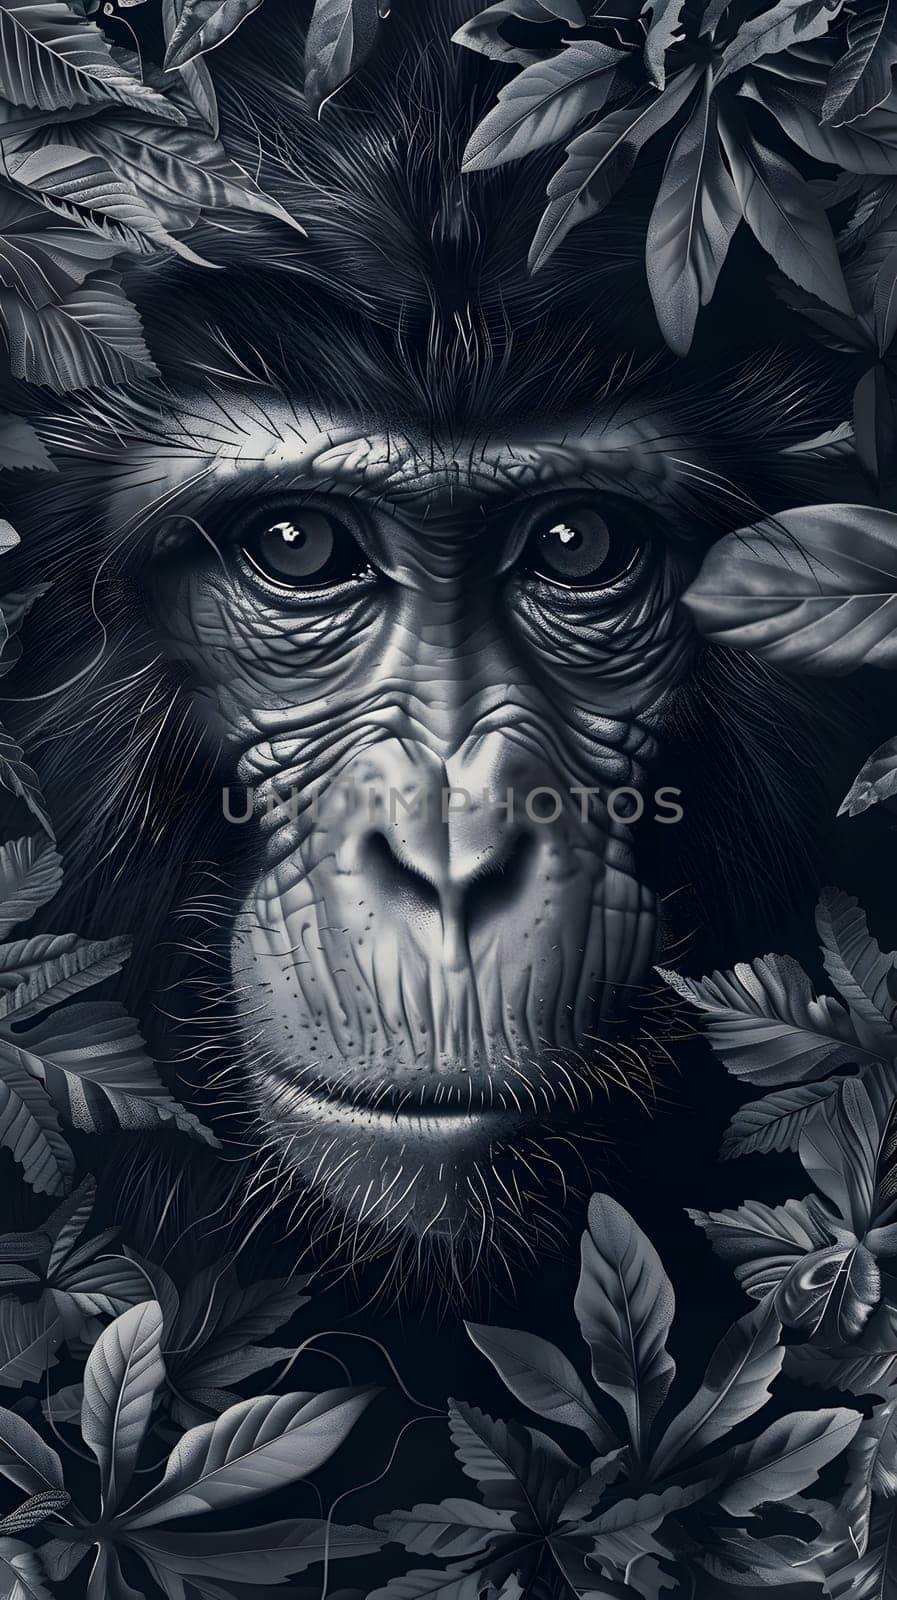 Closeup monochrome painting of a chimpanzee in darkness surrounded by leaves by Nadtochiy